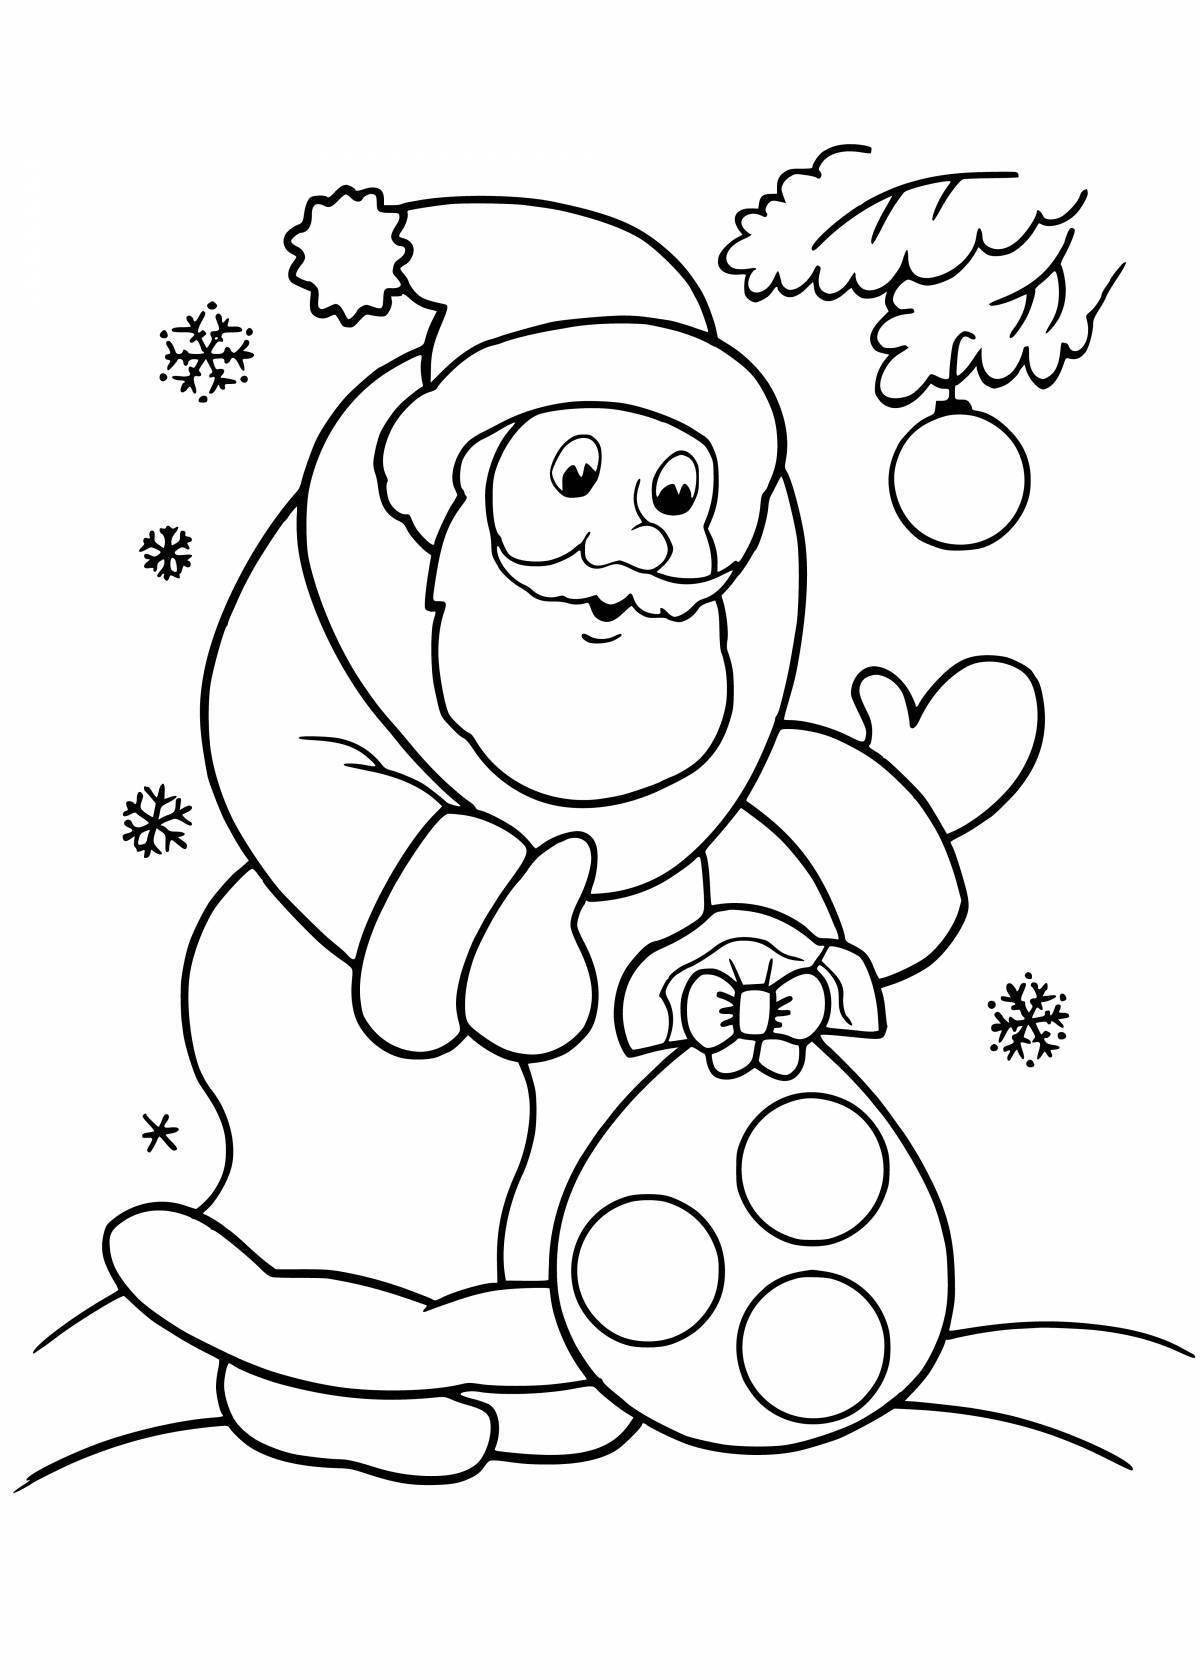 Animated Christmas coloring book for preschoolers